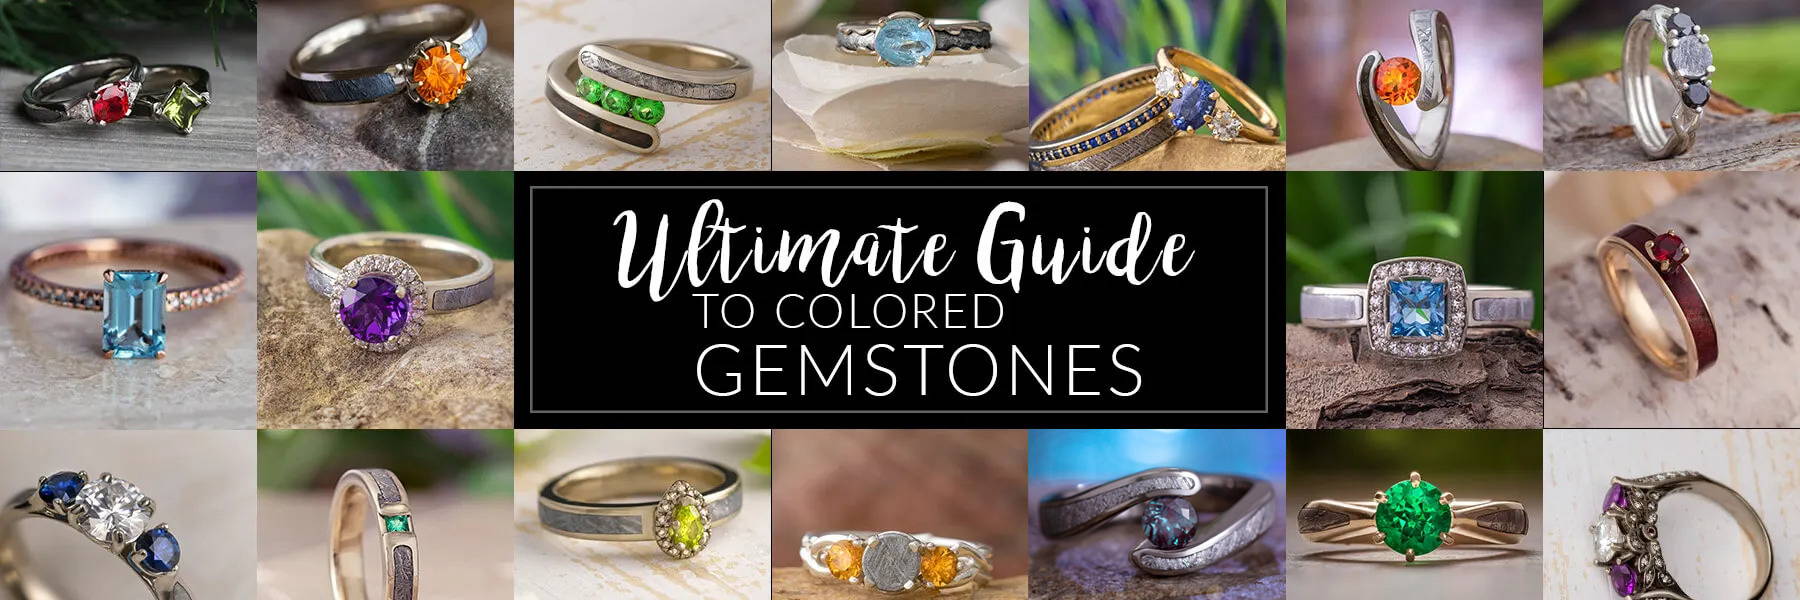 Ultimate Guide to Colored Gemstones